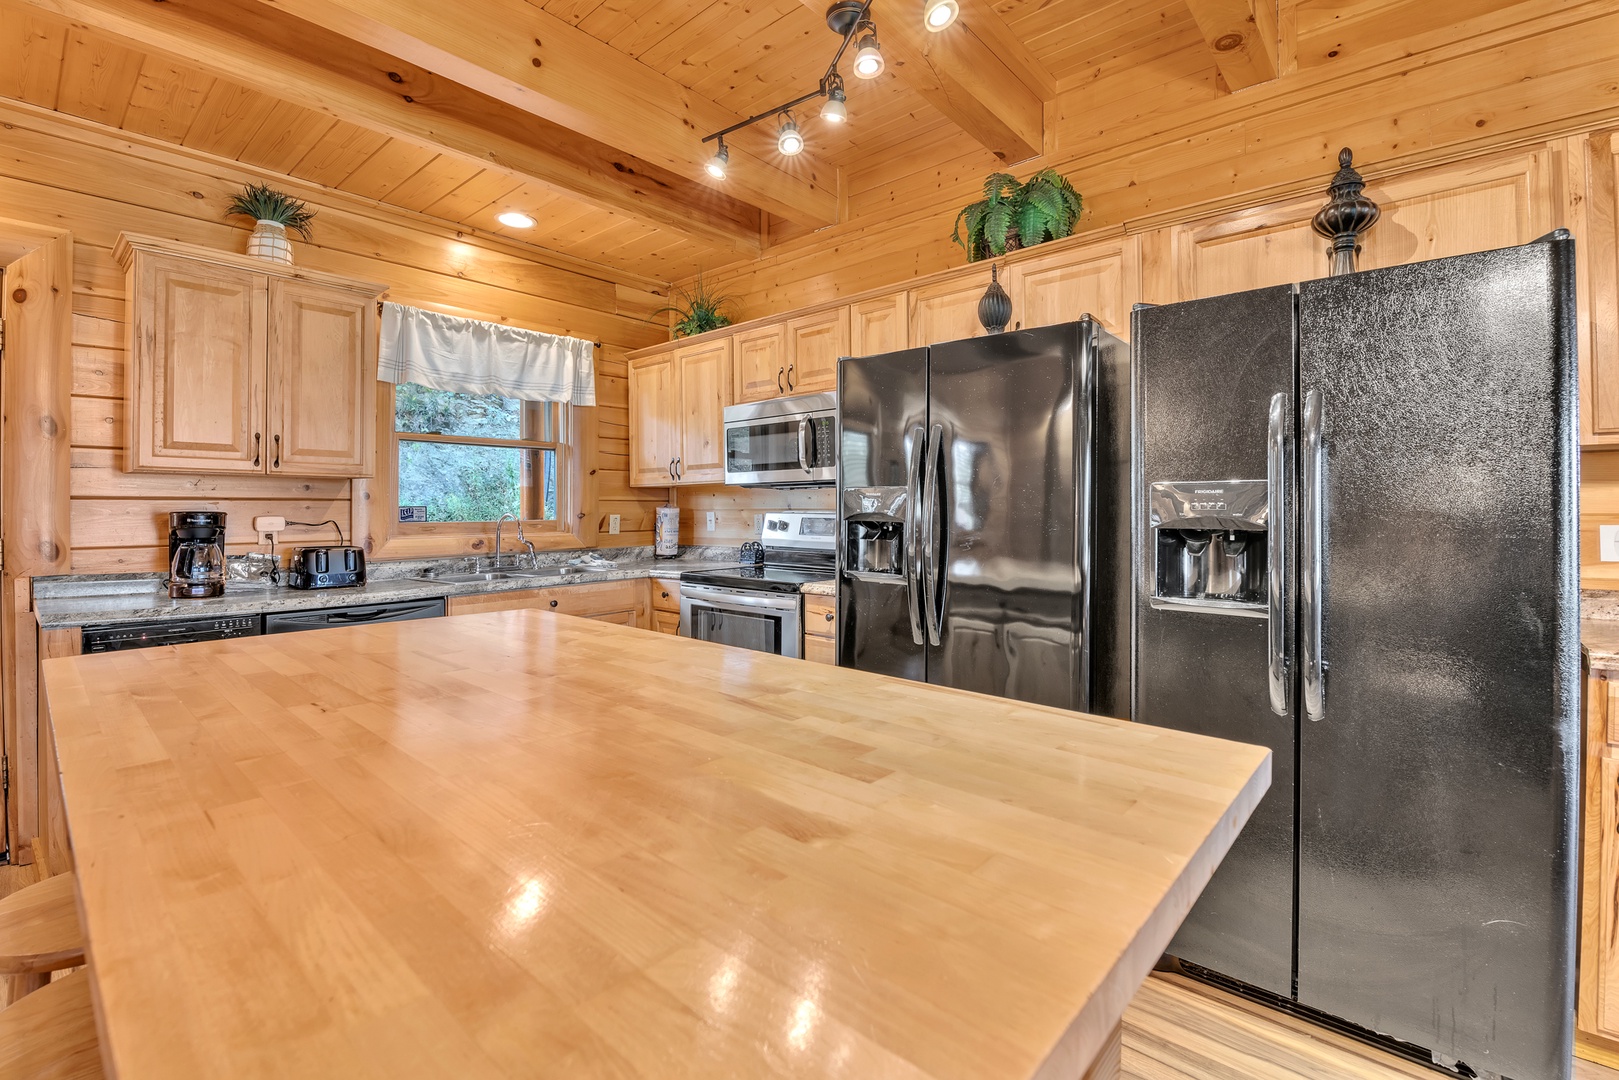 The gorgeous, rustic kitchen offers ample space & all the comforts of home